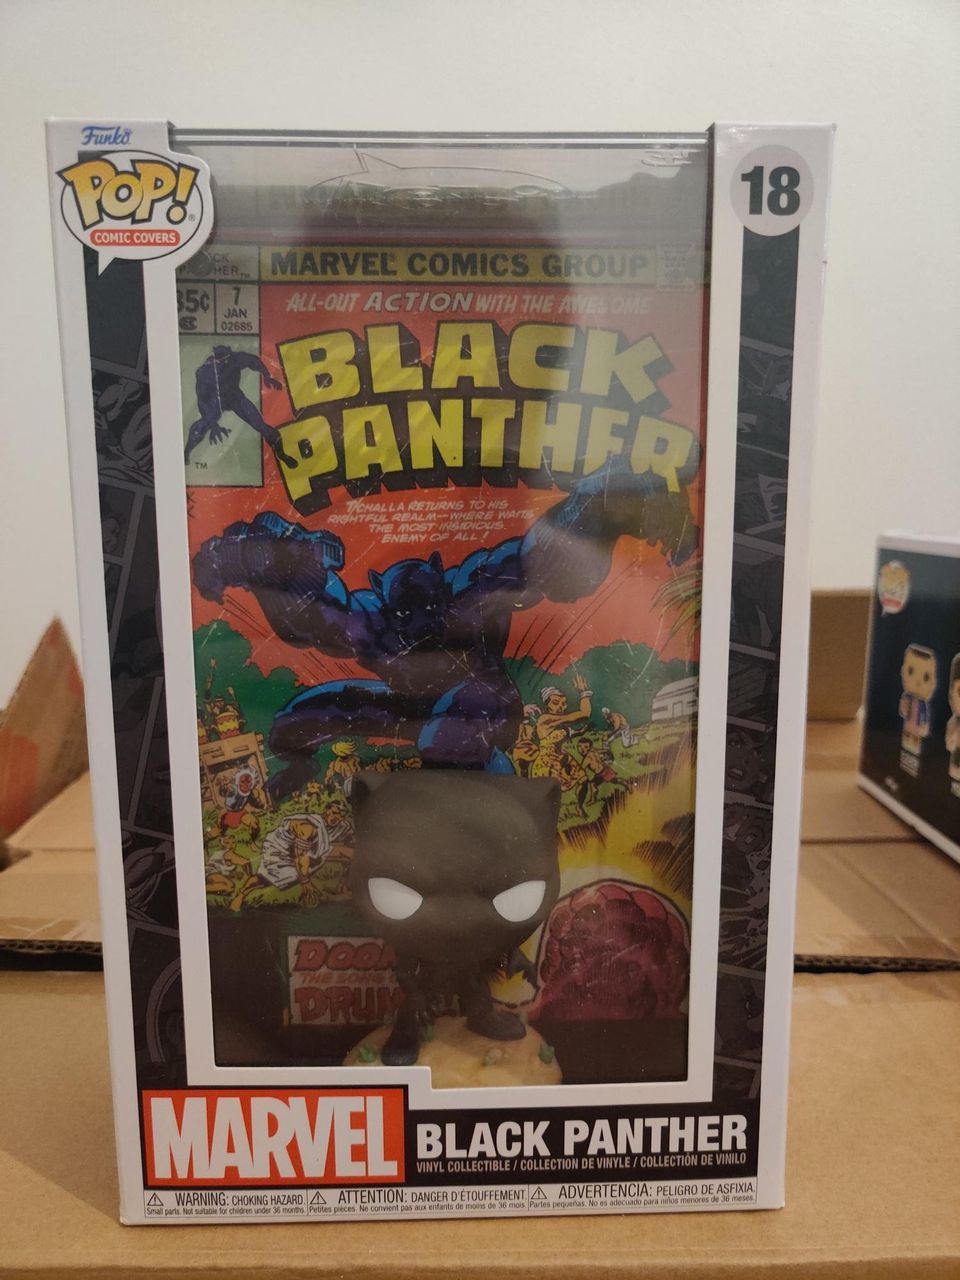 Funko Pop! Black Panther Comic Cover